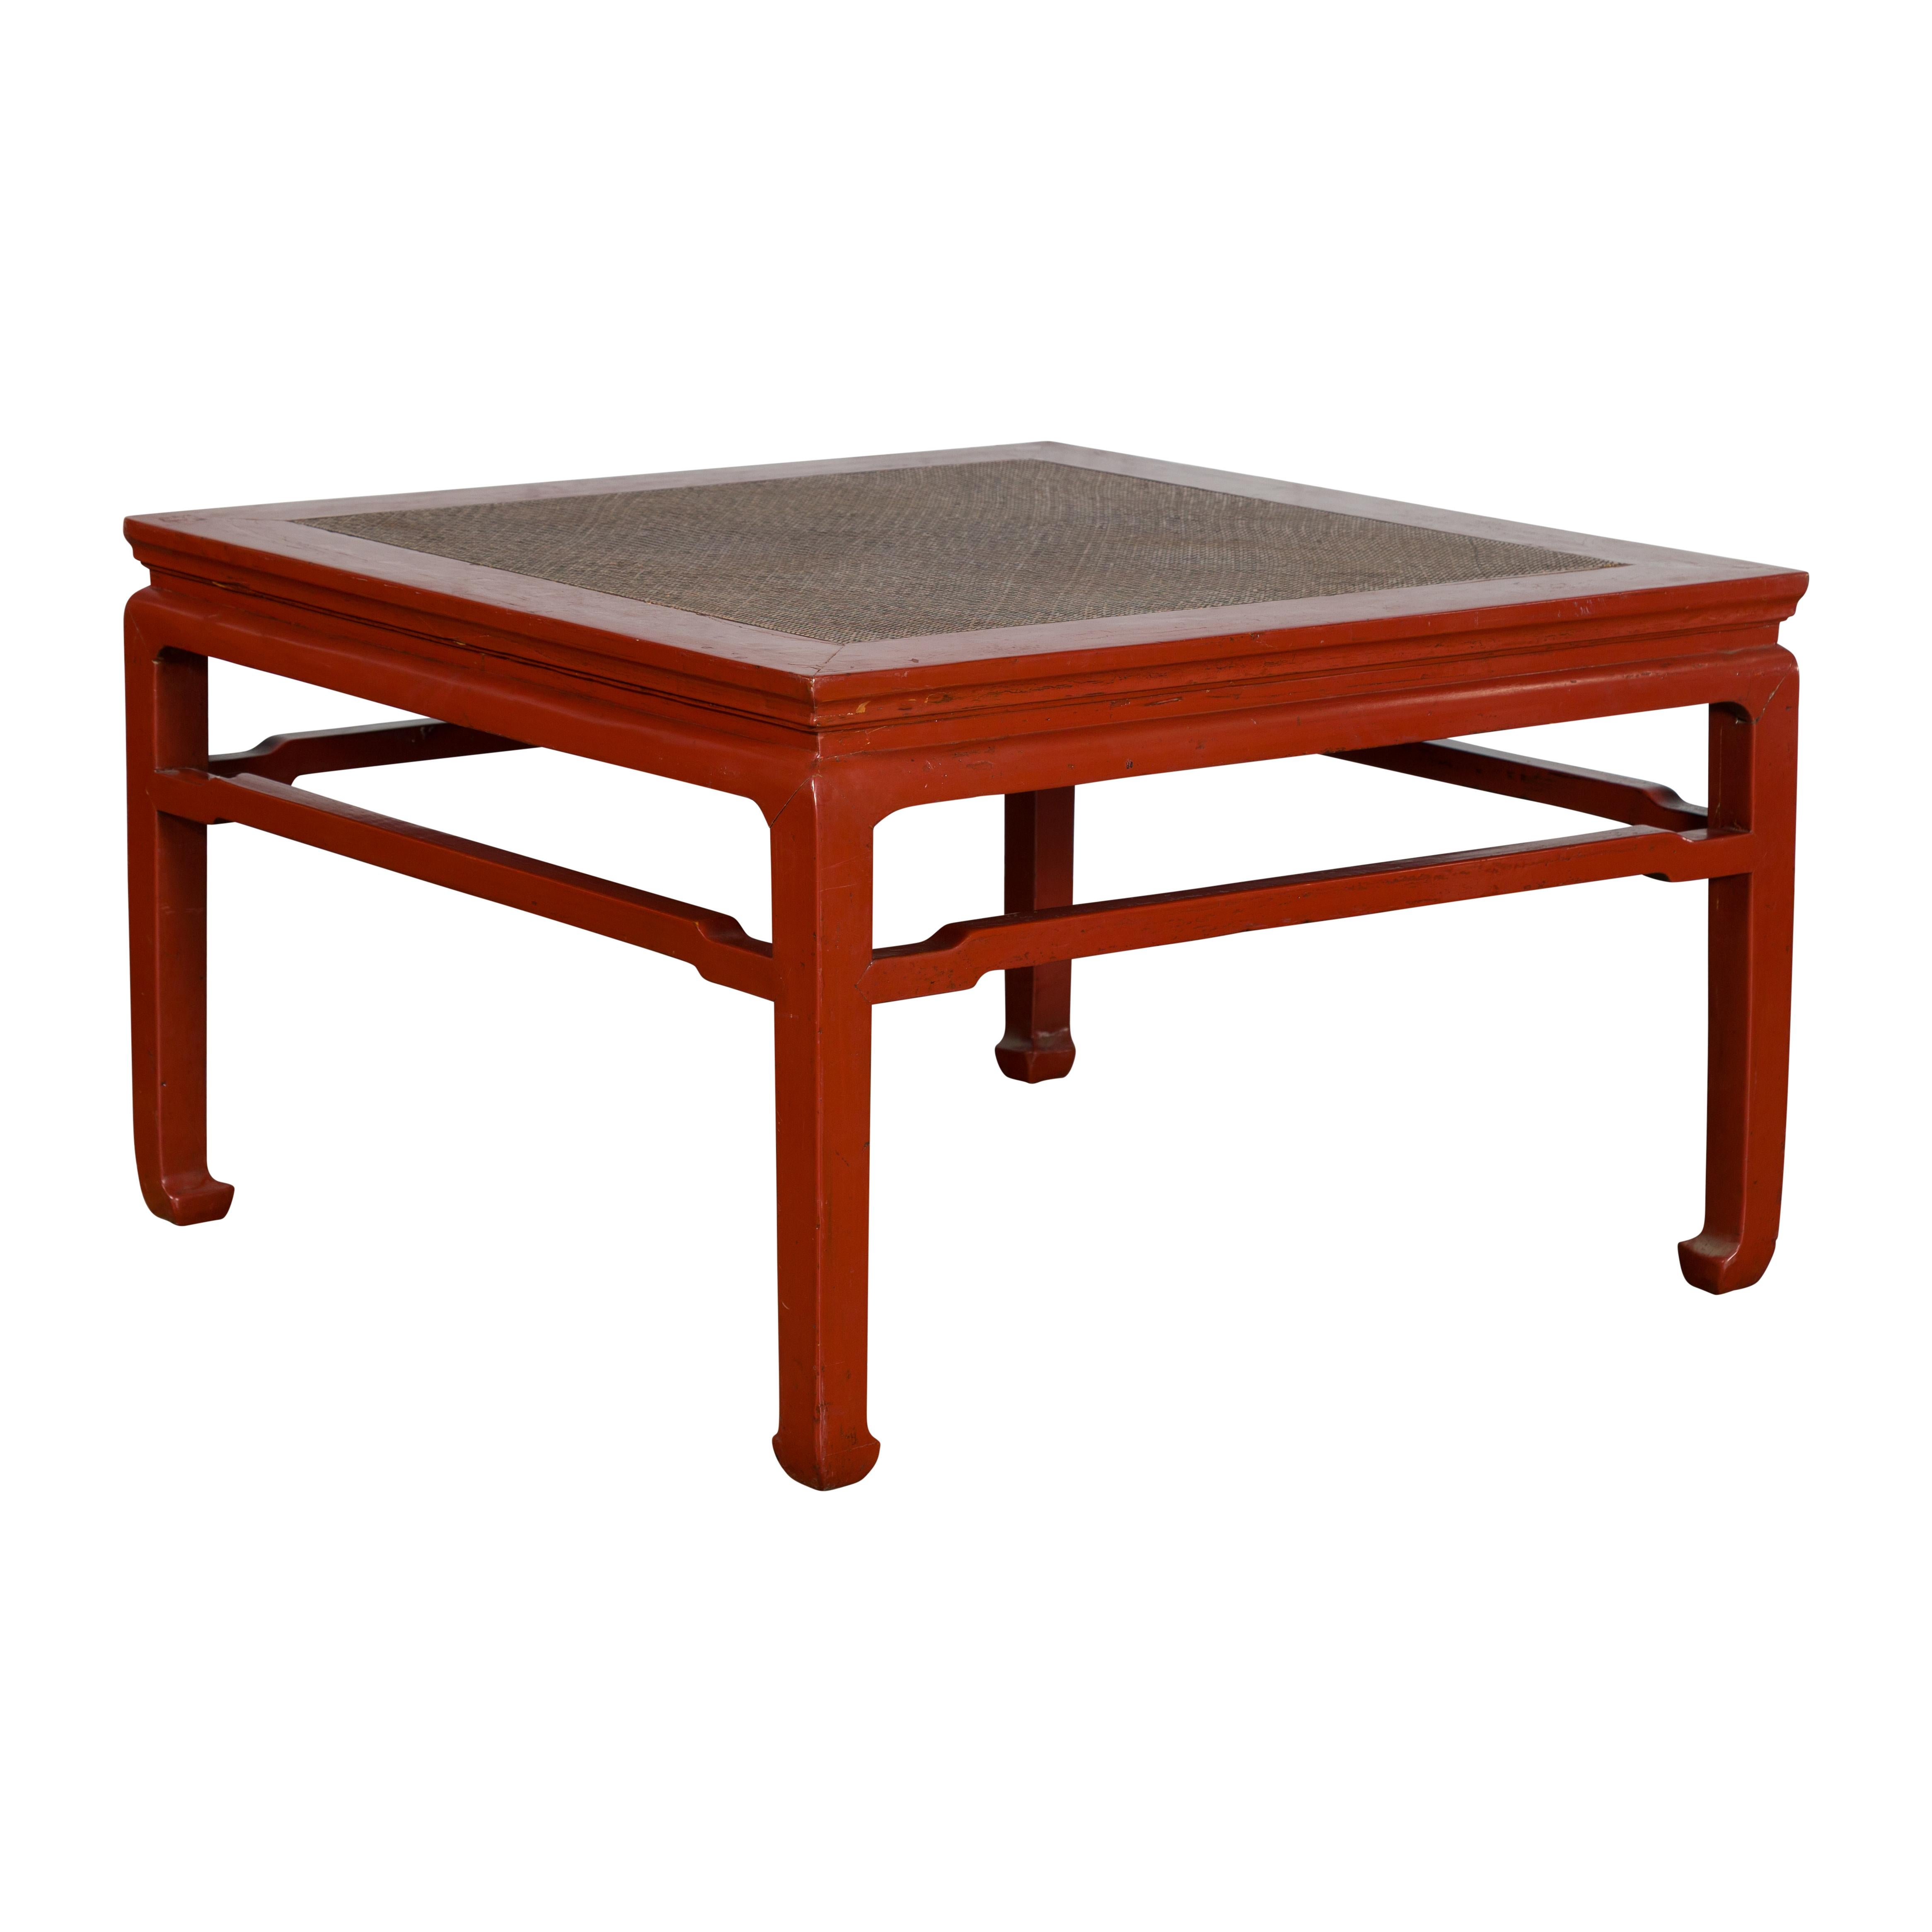 Chinese Early 20th Century Red Lacquer Coffee Table with Hand-Woven Rattan Top For Sale 10